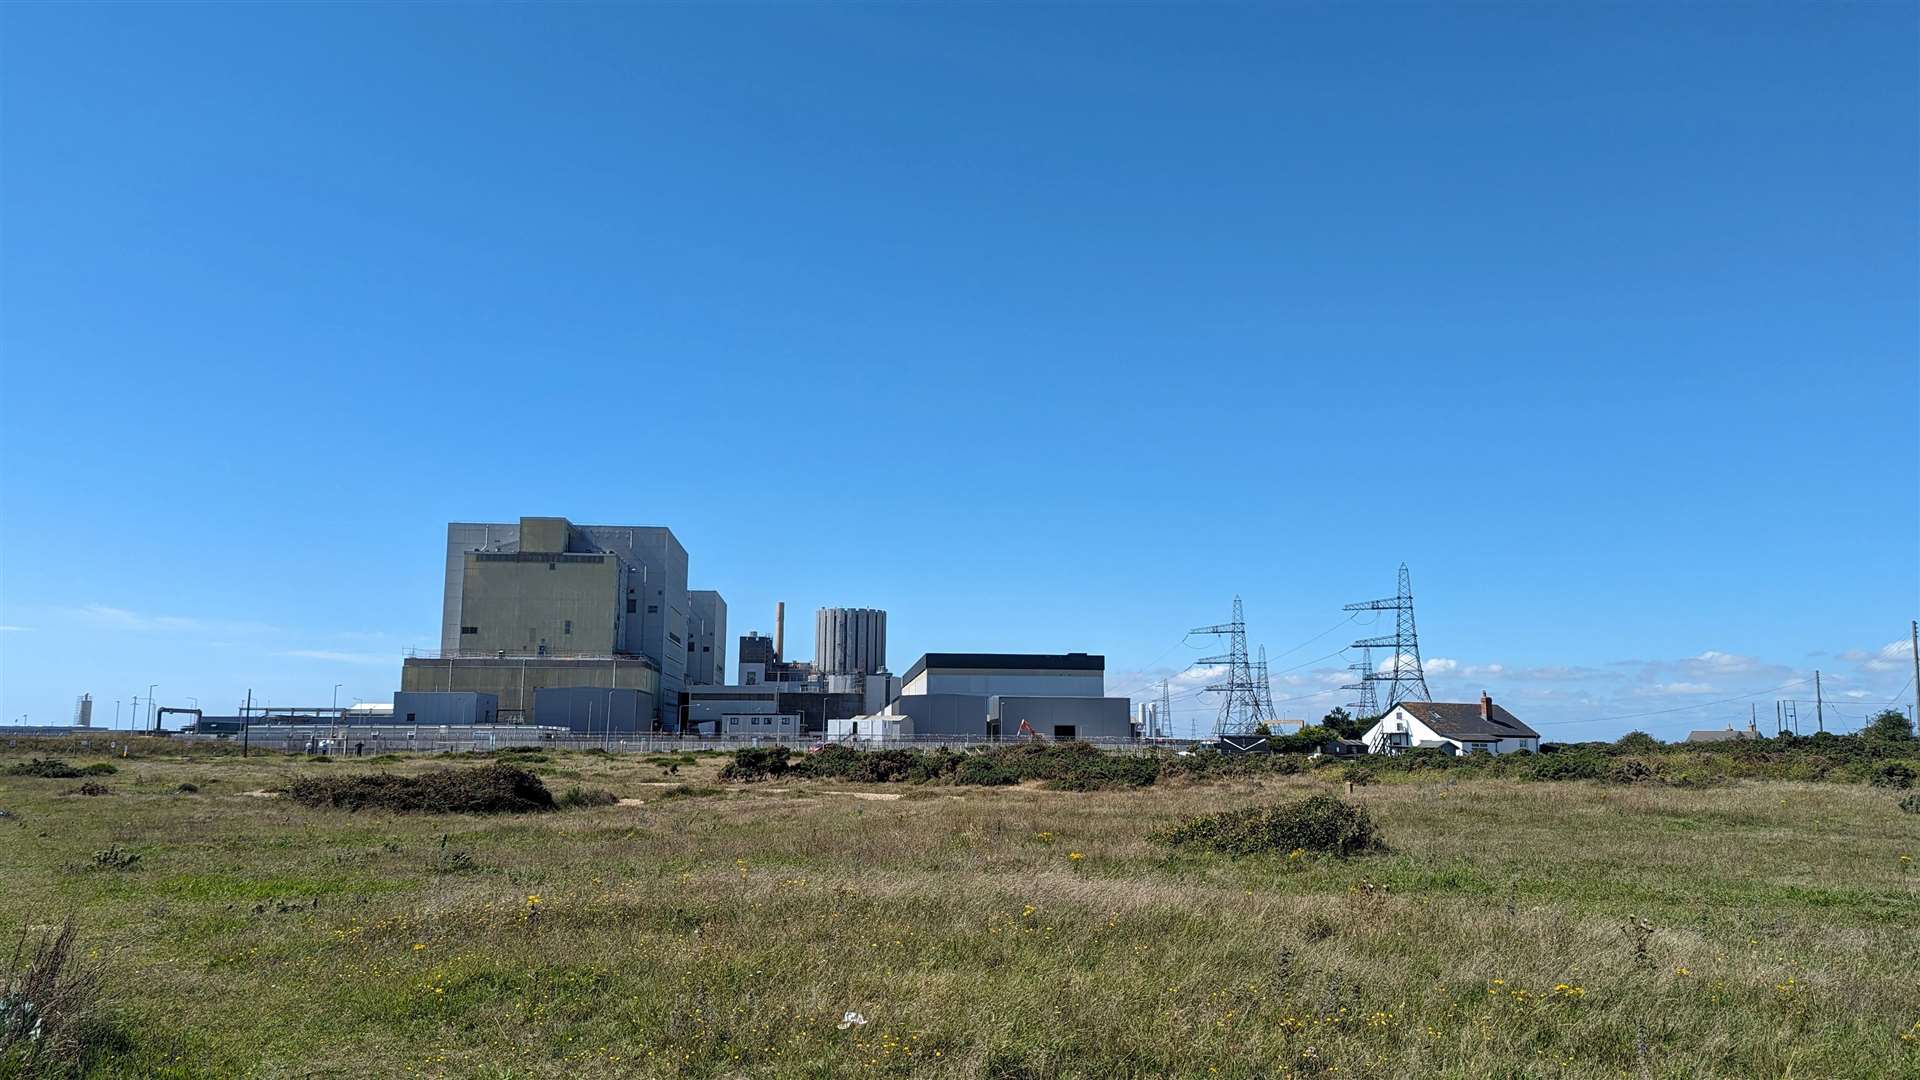 Dungeness has been home to two nuclear power stations – Dungeness A and B. Dungeness A stopped producing power in 2006, and was defuelled in 2012, and Dungeness B was moved into the defueling stage in 2021